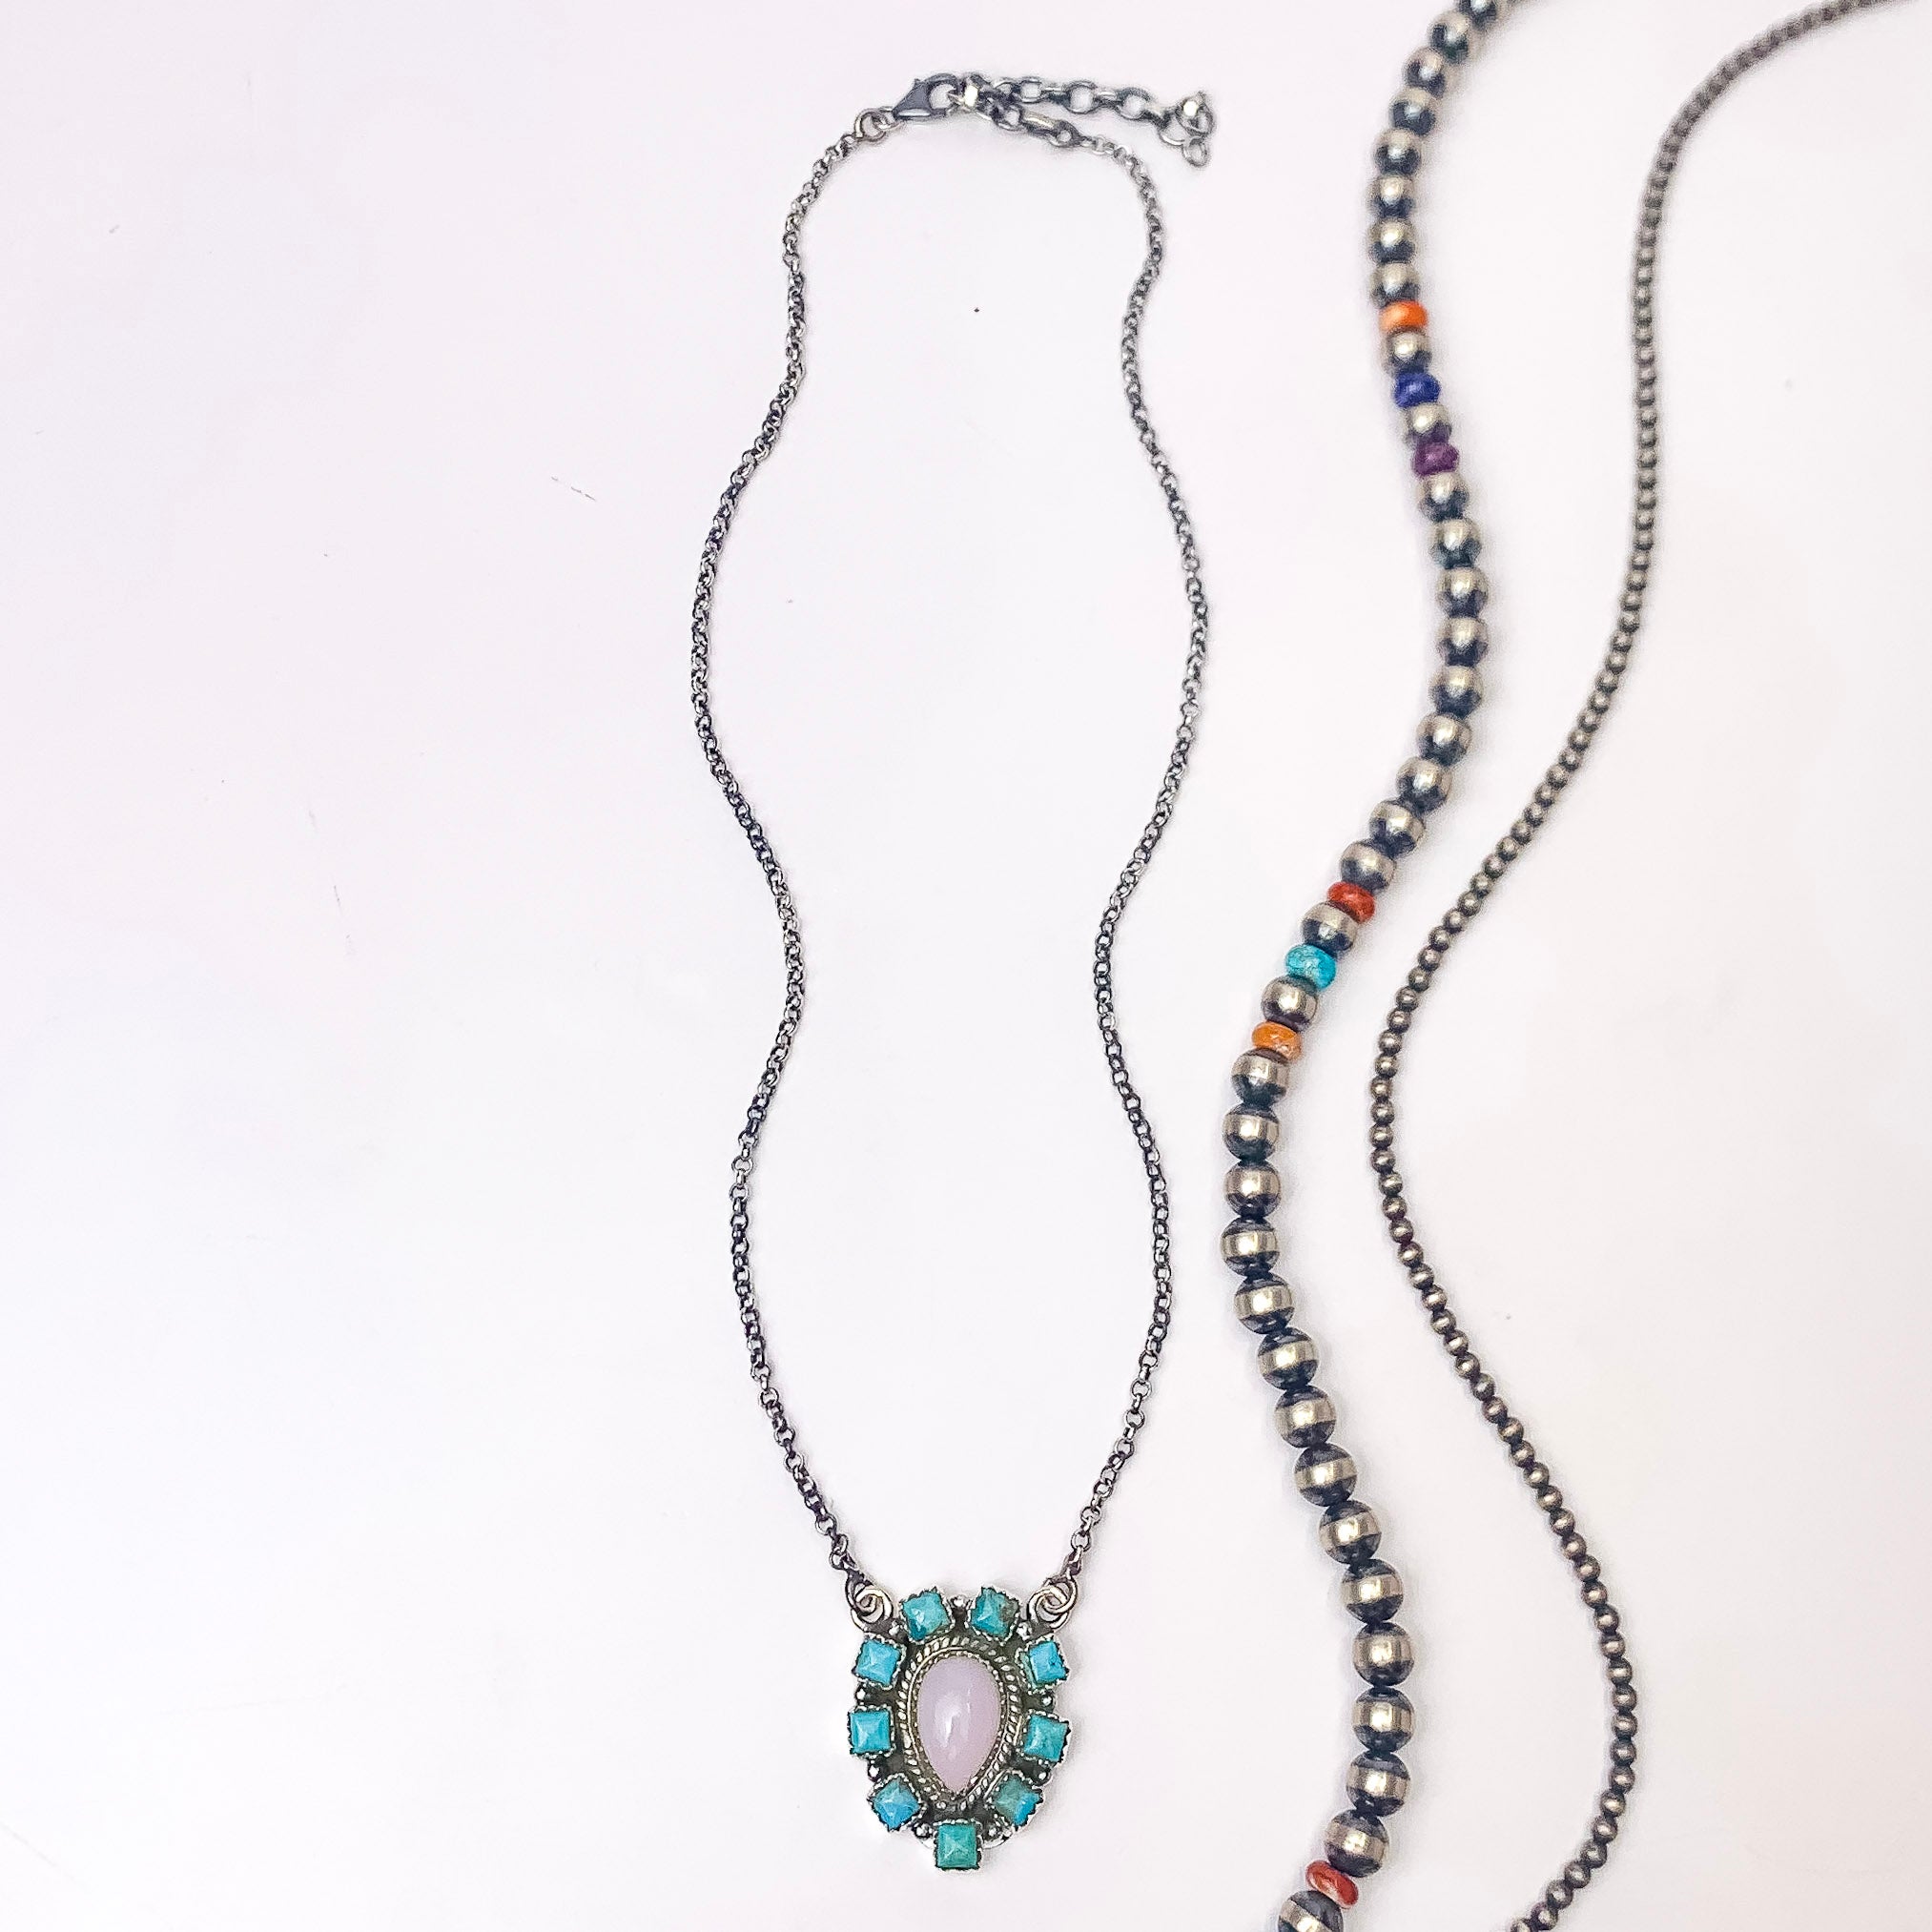 Hada Collection | Handmade Sterling Silver Necklace with Pink Conch Center and Turquoise Stone Outline - Giddy Up Glamour Boutique